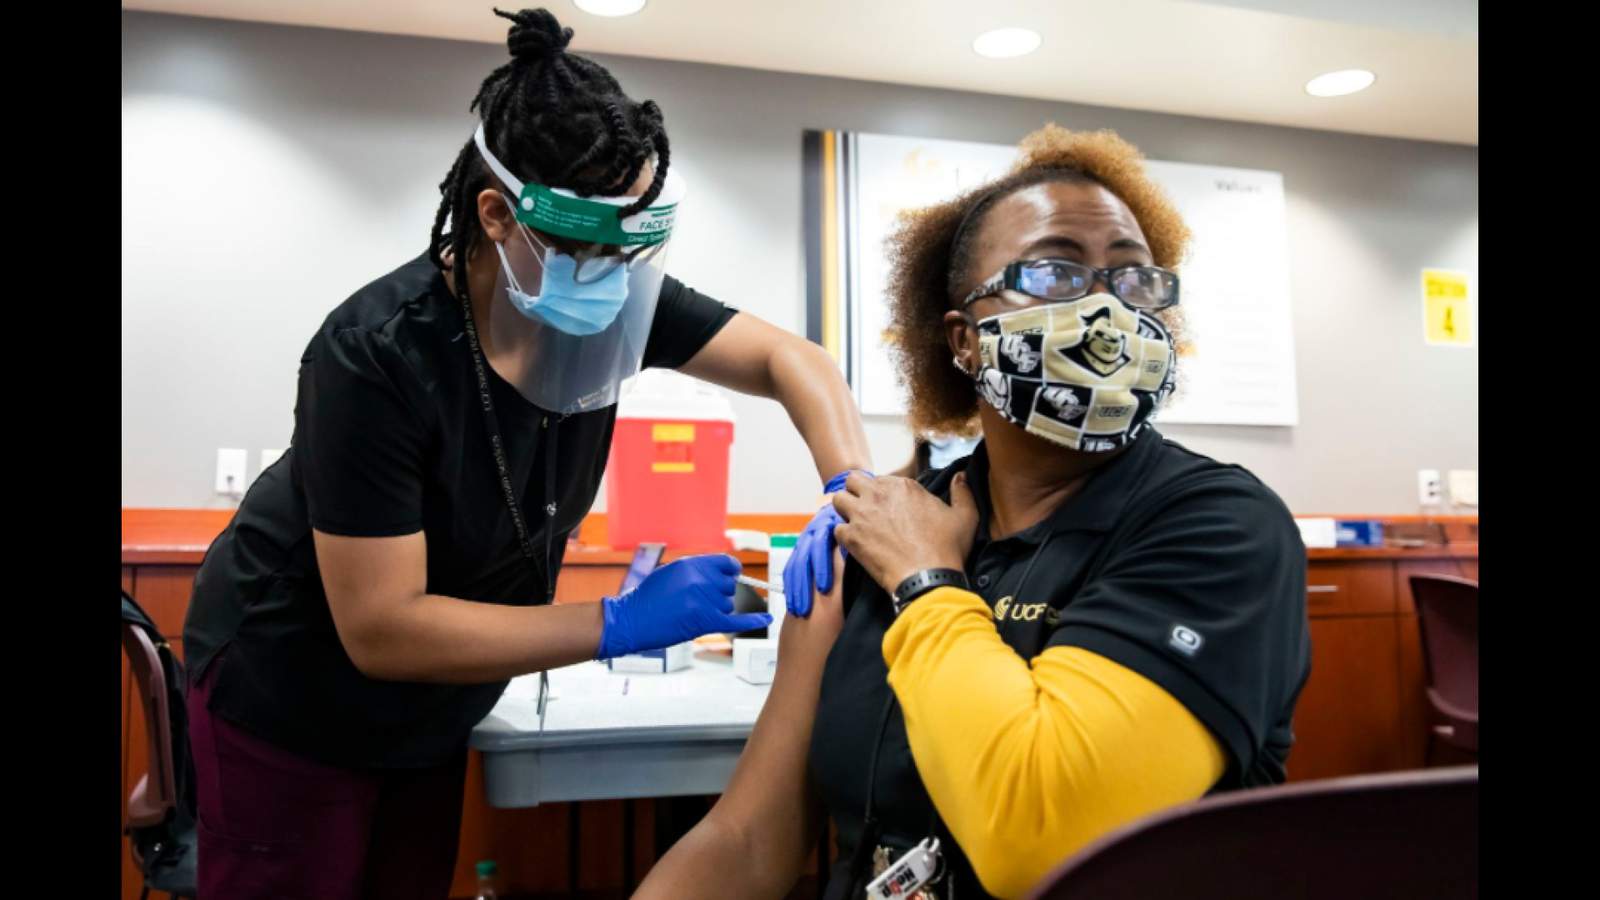 Orange County working with colleges to vaccinate students as more variant cases spread